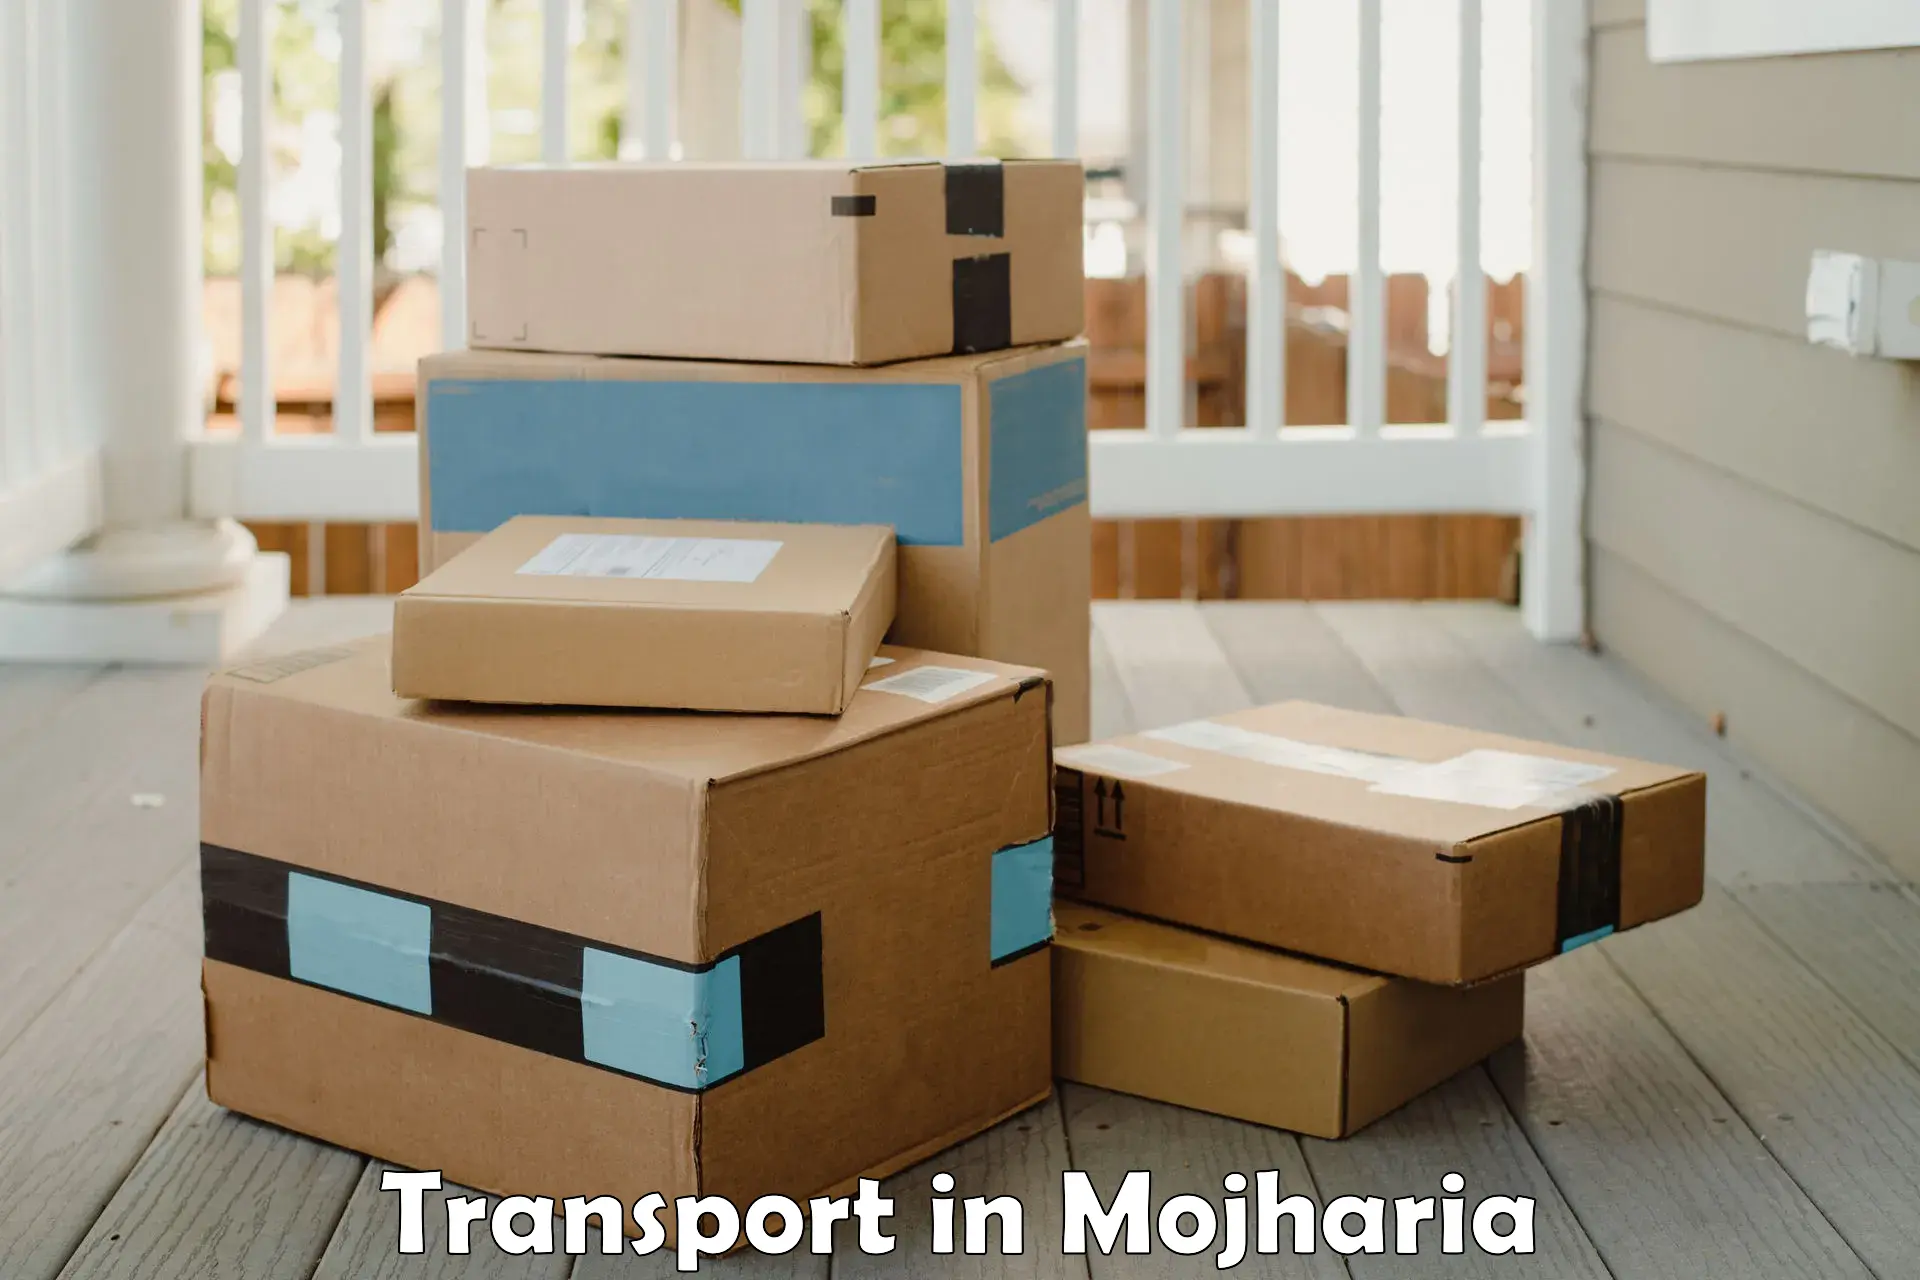 Goods transport services in Mojharia